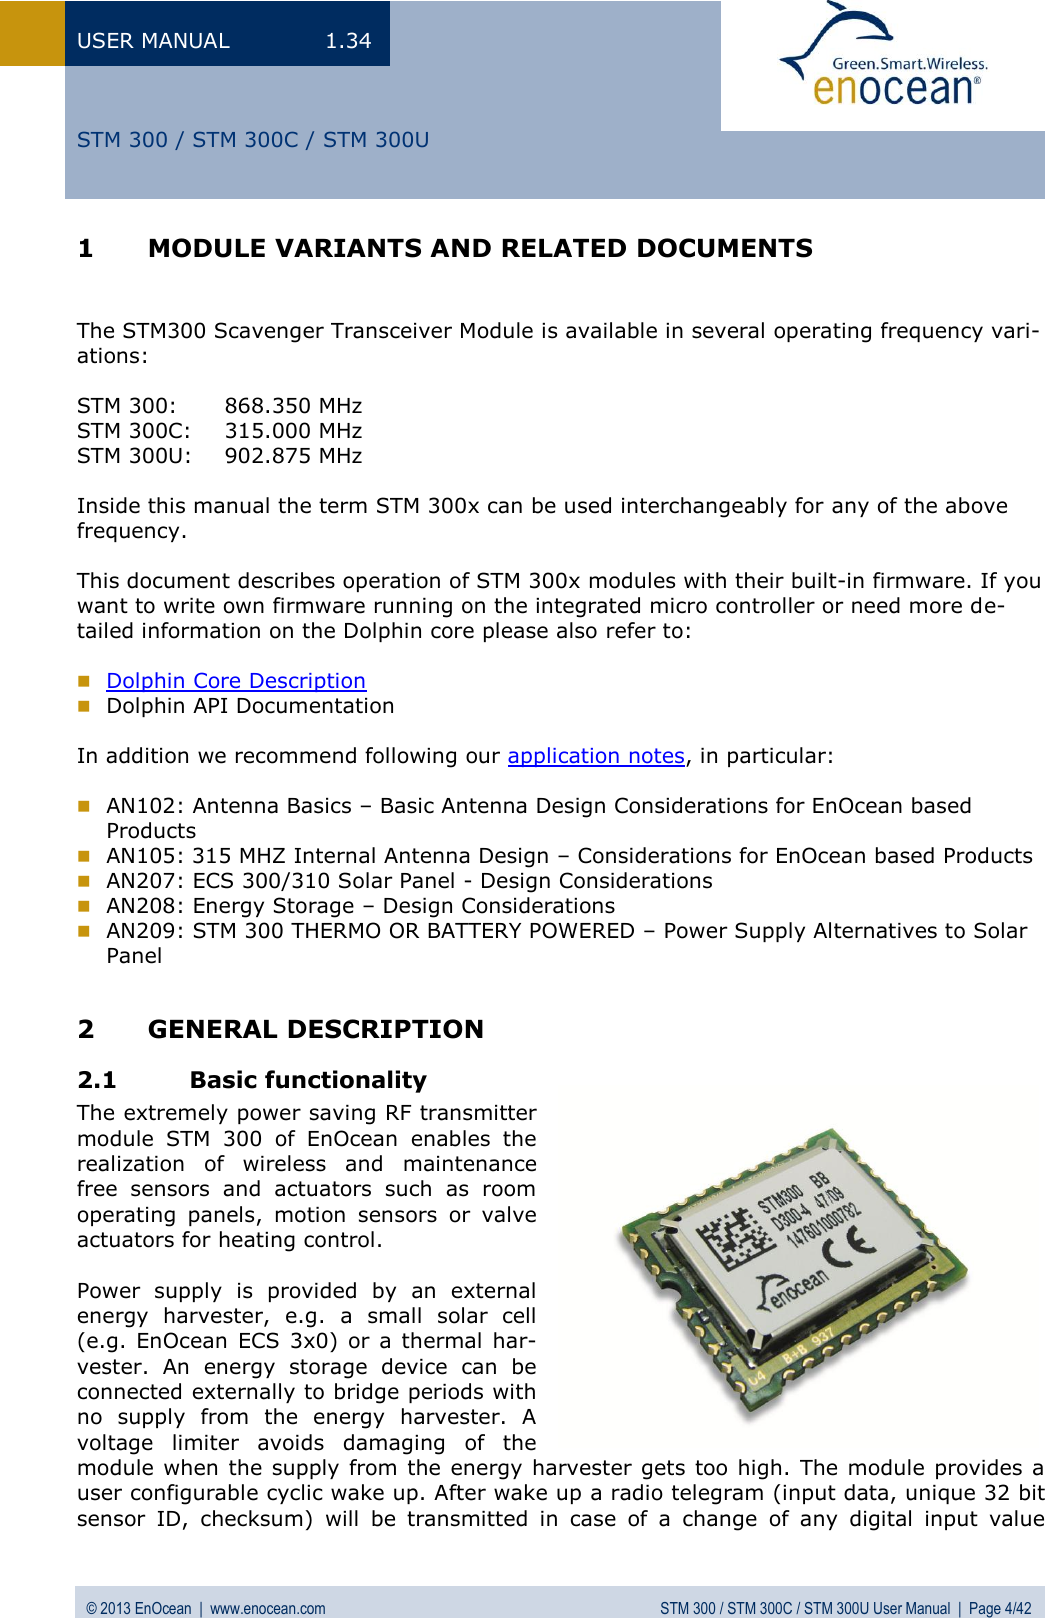 USER MANUAL  1.34 © 2013 EnOcean  |  www.enocean.com  STM 300 / STM 300C / STM 300U User Manual  |  Page 4/42   STM 300 / STM 300C / STM 300U 1 MODULE VARIANTS AND RELATED DOCUMENTS   The STM300 Scavenger Transceiver Module is available in several operating frequency vari-ations:  STM 300:   868.350 MHz STM 300C:  315.000 MHz STM 300U:  902.875 MHz  Inside this manual the term STM 300x can be used interchangeably for any of the above frequency.   This document describes operation of STM 300x modules with their built-in firmware. If you want to write own firmware running on the integrated micro controller or need more de-tailed information on the Dolphin core please also refer to:   Dolphin Core Description  Dolphin API Documentation  In addition we recommend following our application notes, in particular:   AN102: Antenna Basics – Basic Antenna Design Considerations for EnOcean based  Products  AN105: 315 MHZ Internal Antenna Design – Considerations for EnOcean based Products  AN207: ECS 300/310 Solar Panel - Design Considerations  AN208: Energy Storage – Design Considerations  AN209: STM 300 THERMO OR BATTERY POWERED – Power Supply Alternatives to Solar Panel  2 GENERAL DESCRIPTION 2.1 Basic functionality The extremely power saving RF transmitter module  STM  300  of  EnOcean  enables  the realization  of  wireless  and  maintenance free  sensors  and  actuators  such  as  room operating  panels,  motion  sensors  or  valve actuators for heating control.  Power  supply  is  provided  by  an  external energy  harvester,  e.g.  a  small  solar  cell (e.g. EnOcean  ECS  3x0) or a thermal  har-vester.  An  energy  storage  device  can  be connected externally to bridge periods with no  supply  from  the  energy  harvester.  A voltage  limiter  avoids  damaging  of  the module when the supply from the energy harvester gets too high. The module provides a user configurable cyclic wake up. After wake up a radio telegram (input data, unique 32 bit sensor  ID,  checksum)  will  be  transmitted  in  case  of  a  change  of  any  digital  input  value 